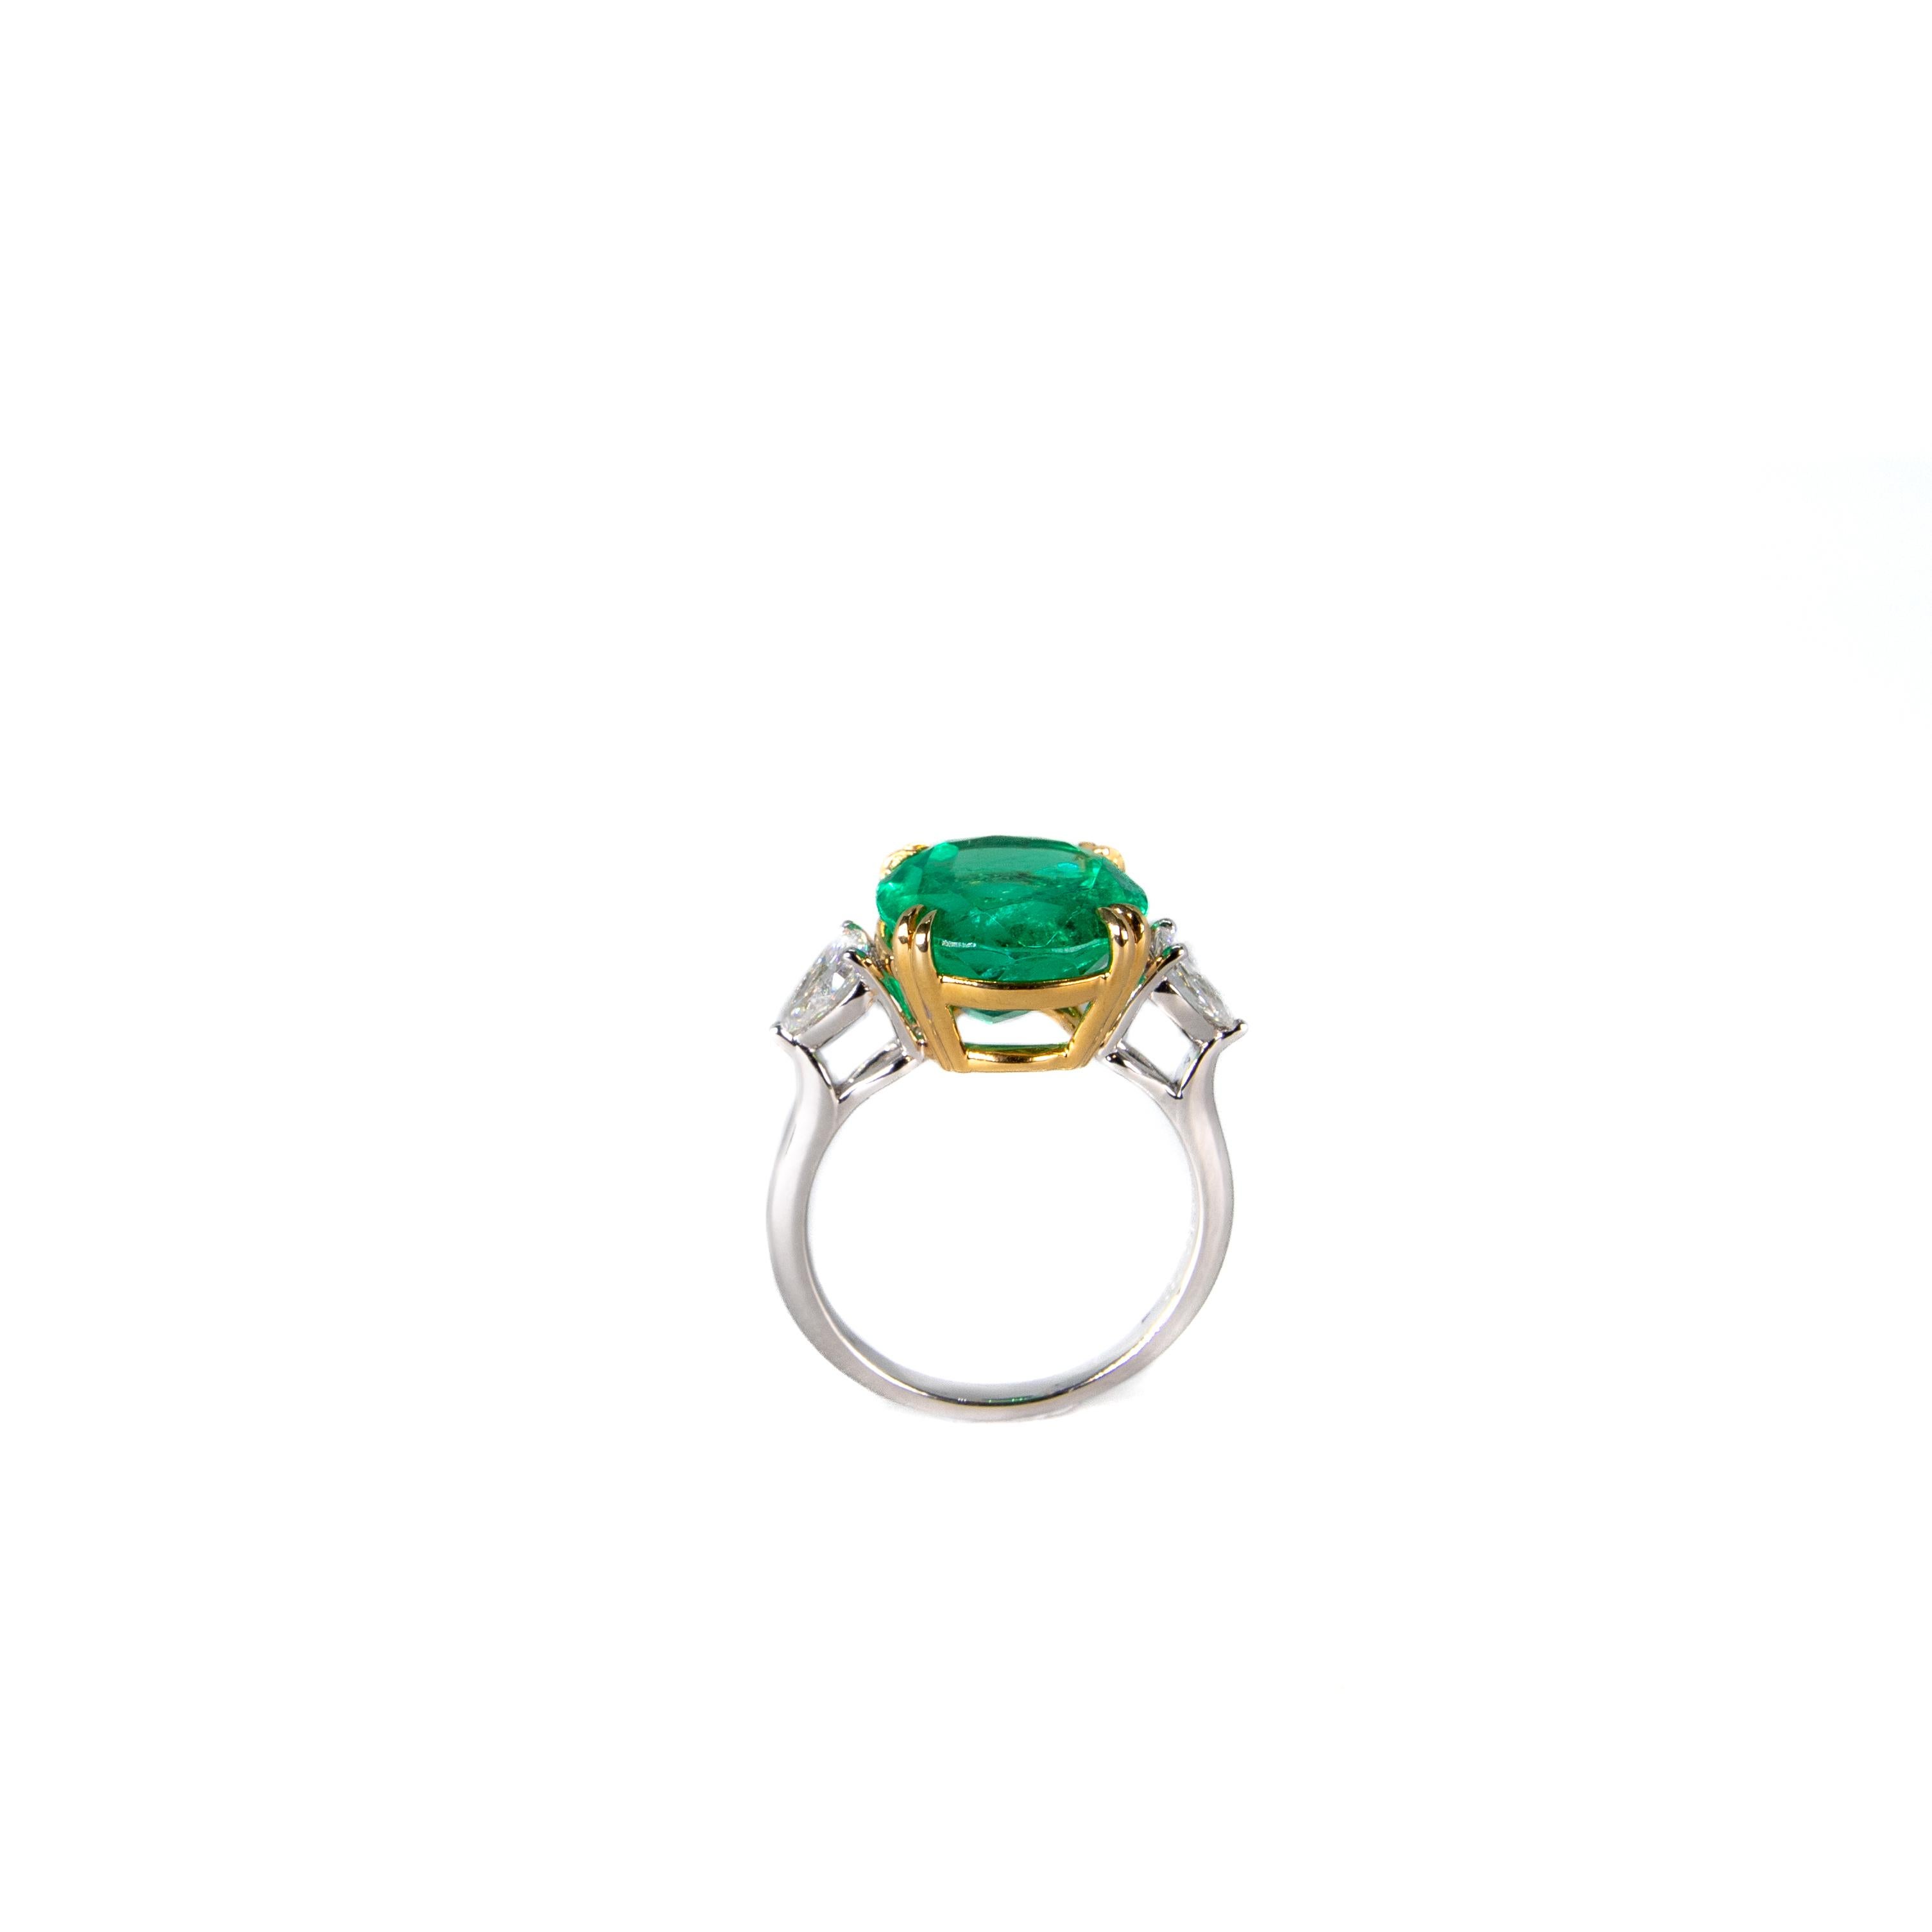 5.51ct Certified Colombian Emerald Insignificant Oil and Pear Shape Diamond Ring For Sale 4